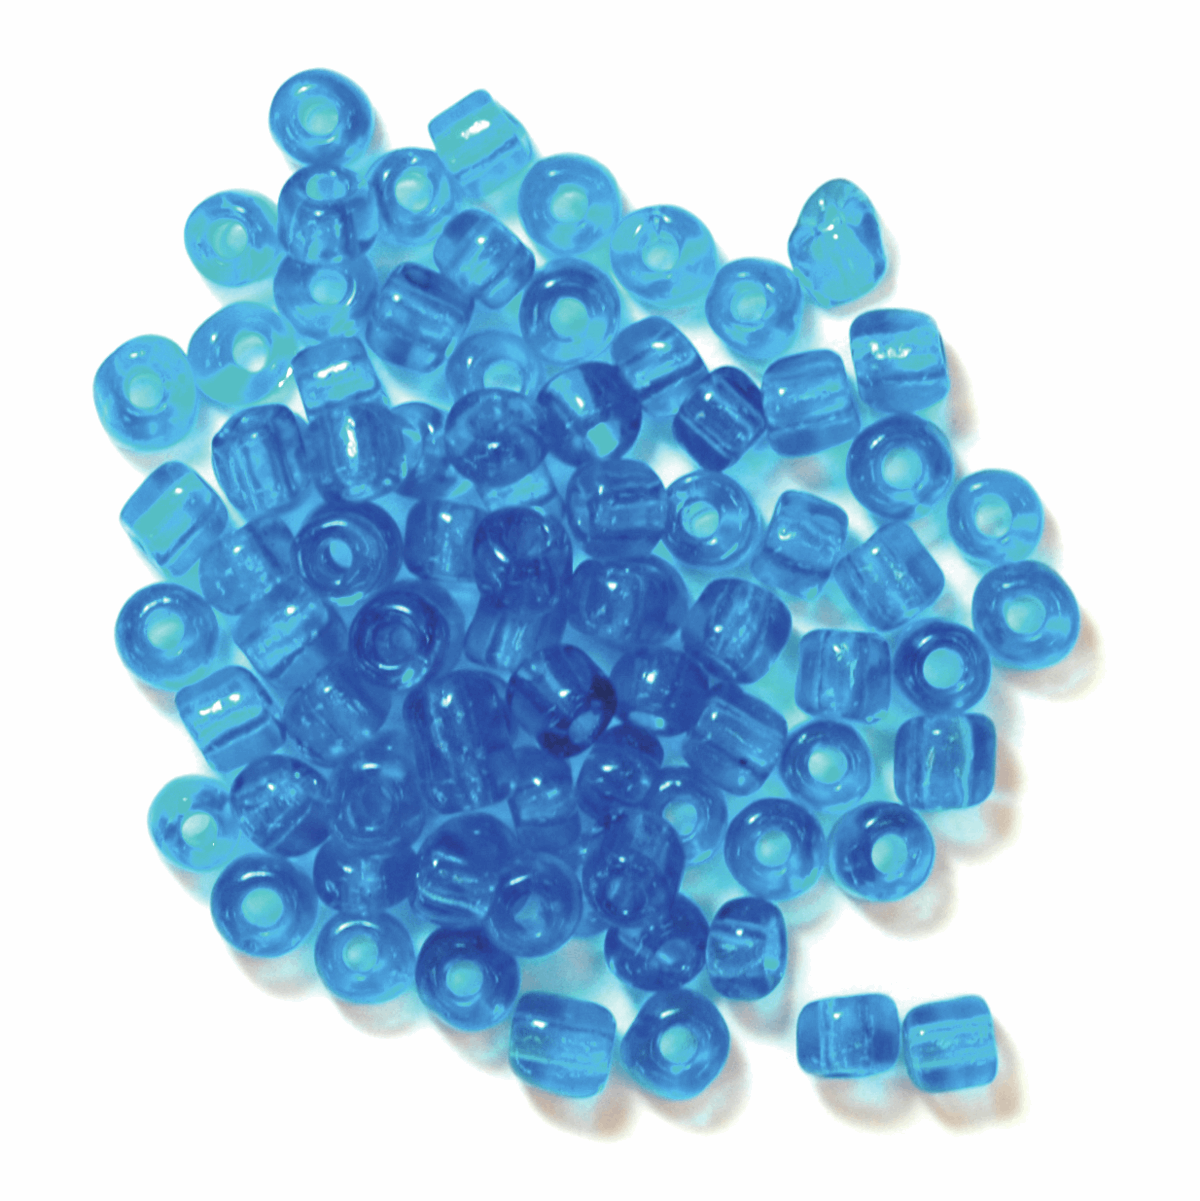 Trimits Blue E Beads - 4mm (Pack of 15g)